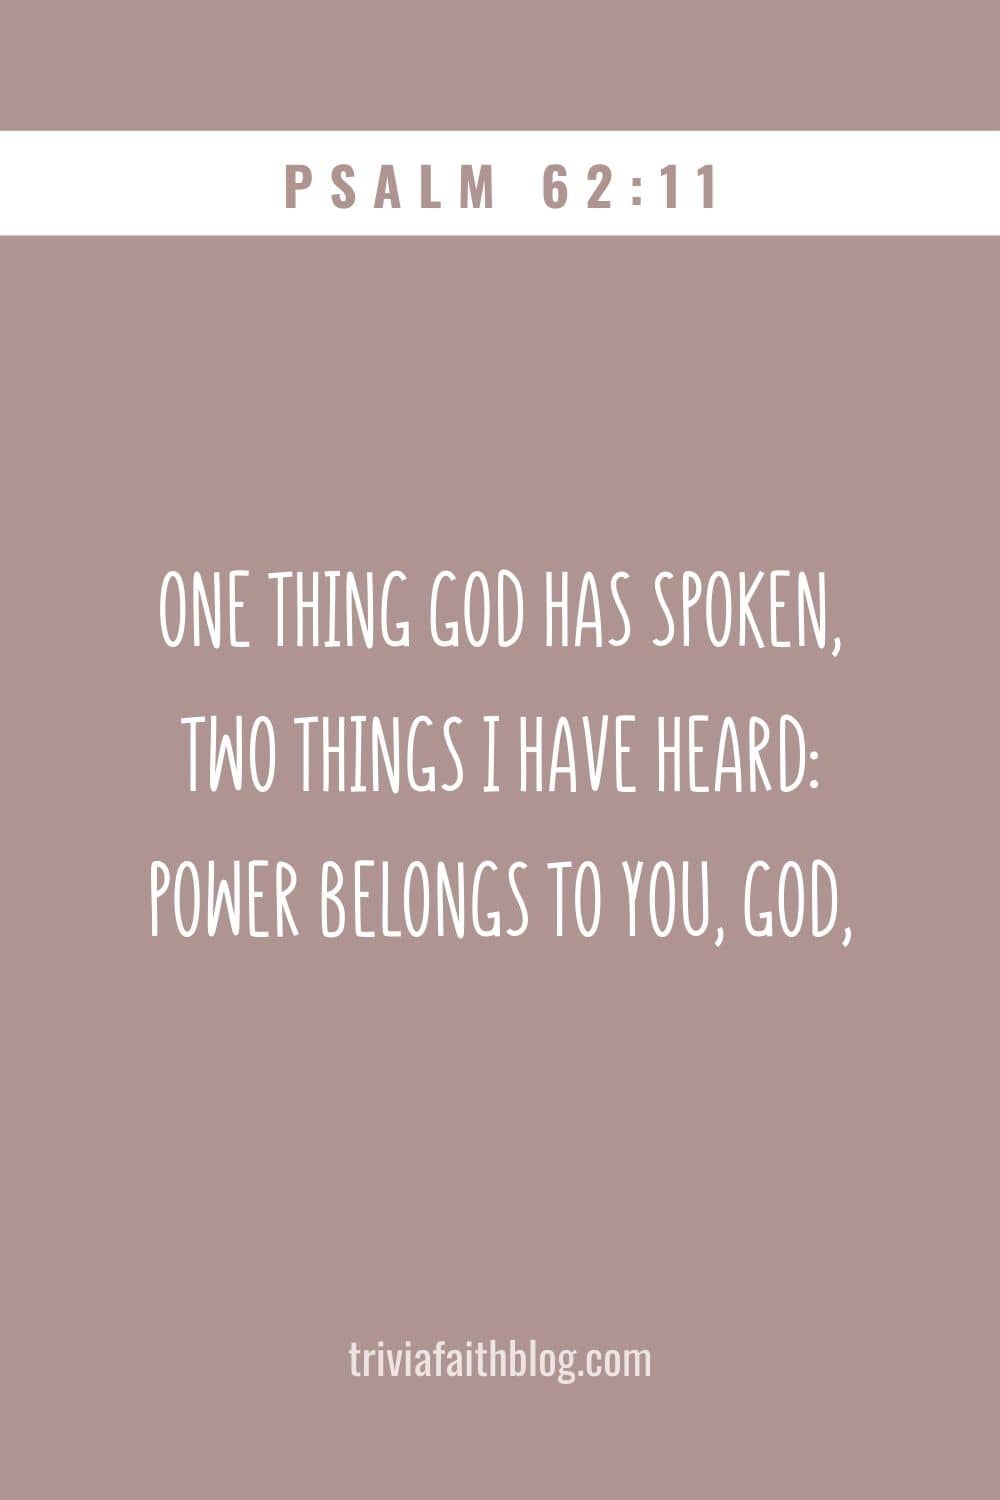 One thing God has spoken, two things I have heard Power belongs to you, God